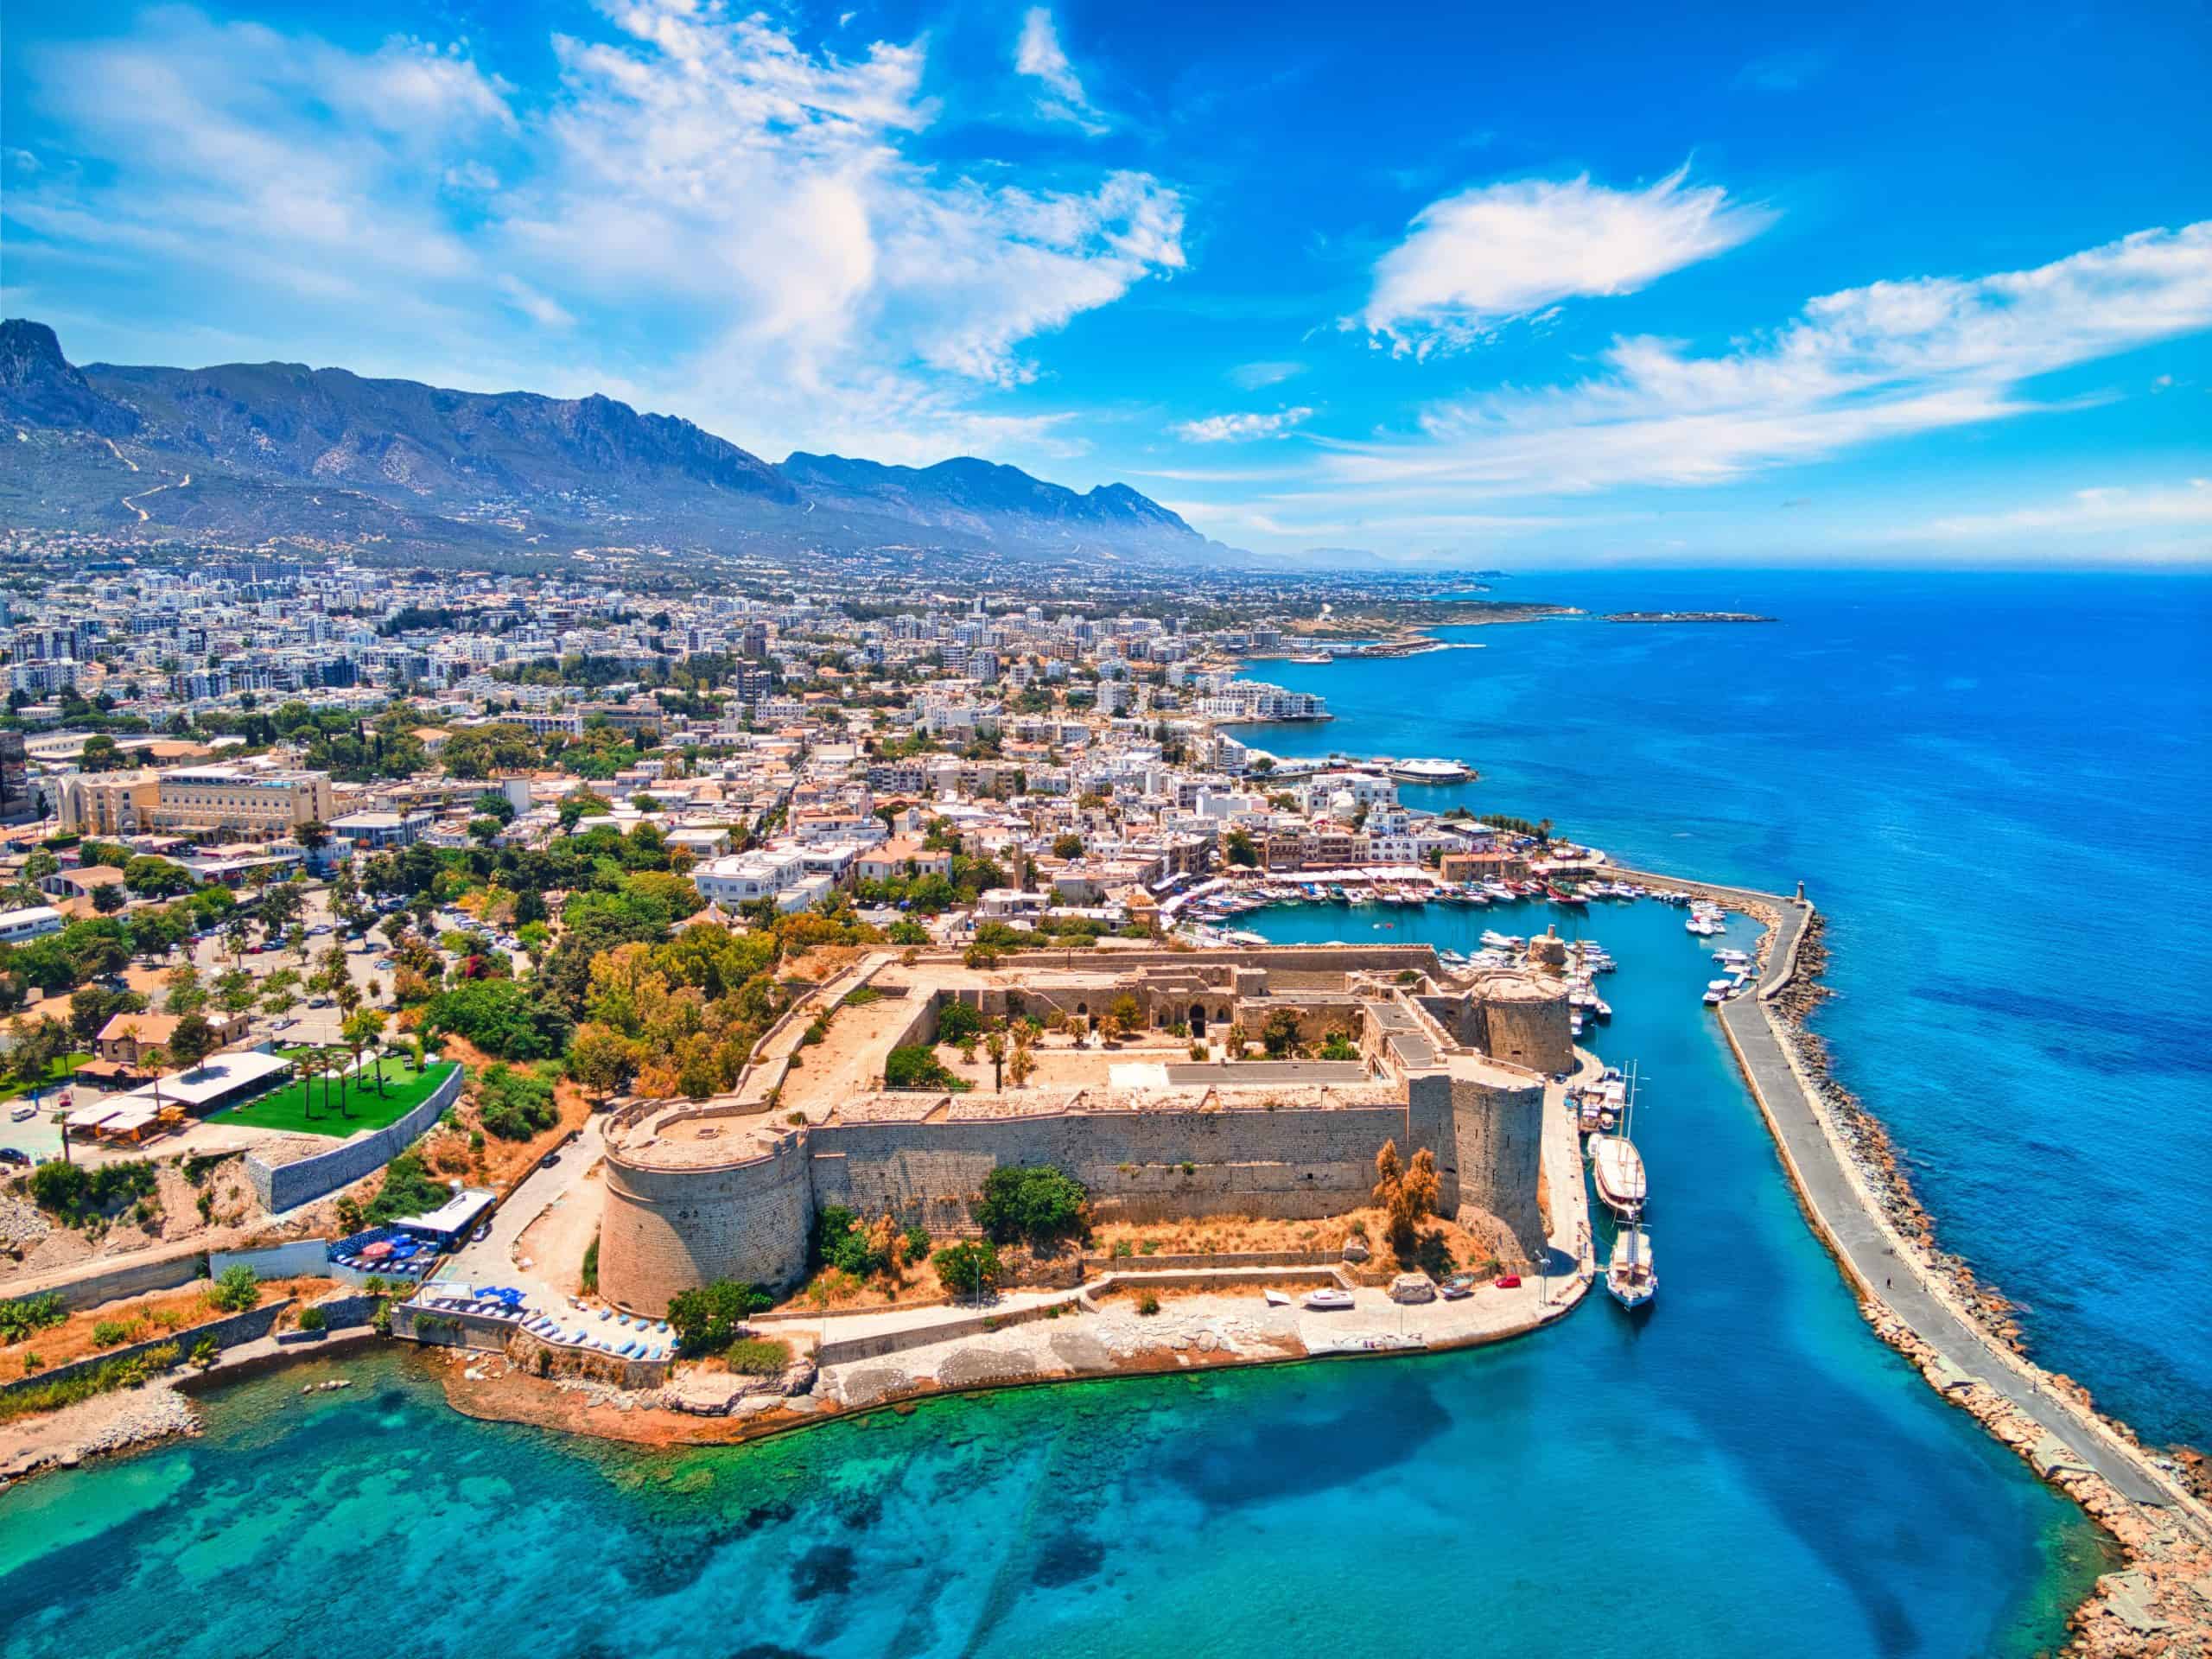 <ul> <li><strong>Daily cost:</strong> $92.49</li> </ul> <p>There's a common denominator among a lot of these countries, which is that they're islands. Cyprus is an island nation in the Mediterranean Sea. People who are looking to flex on their friends and family with a beautiful destination will enjoy the views Cyprus offers. A large percentage of the culture in Cyprus has been influenced by Greece. There was once a time when the Greeks ruled over the island.</p> <p>The most ideal time to visit Cyprus is during the summer. These months allow tourists to walk around in comfortable temperatures. There's still time to visit the beach and play in the water. There are numerous ways to get to Cyprus. Some people prefer flying directly in. Others enjoy the boat ride through the Mediterranean and seeing the various nations that surround Cyprus. People in Cyprus spend $90 per day during their vacation.</p>